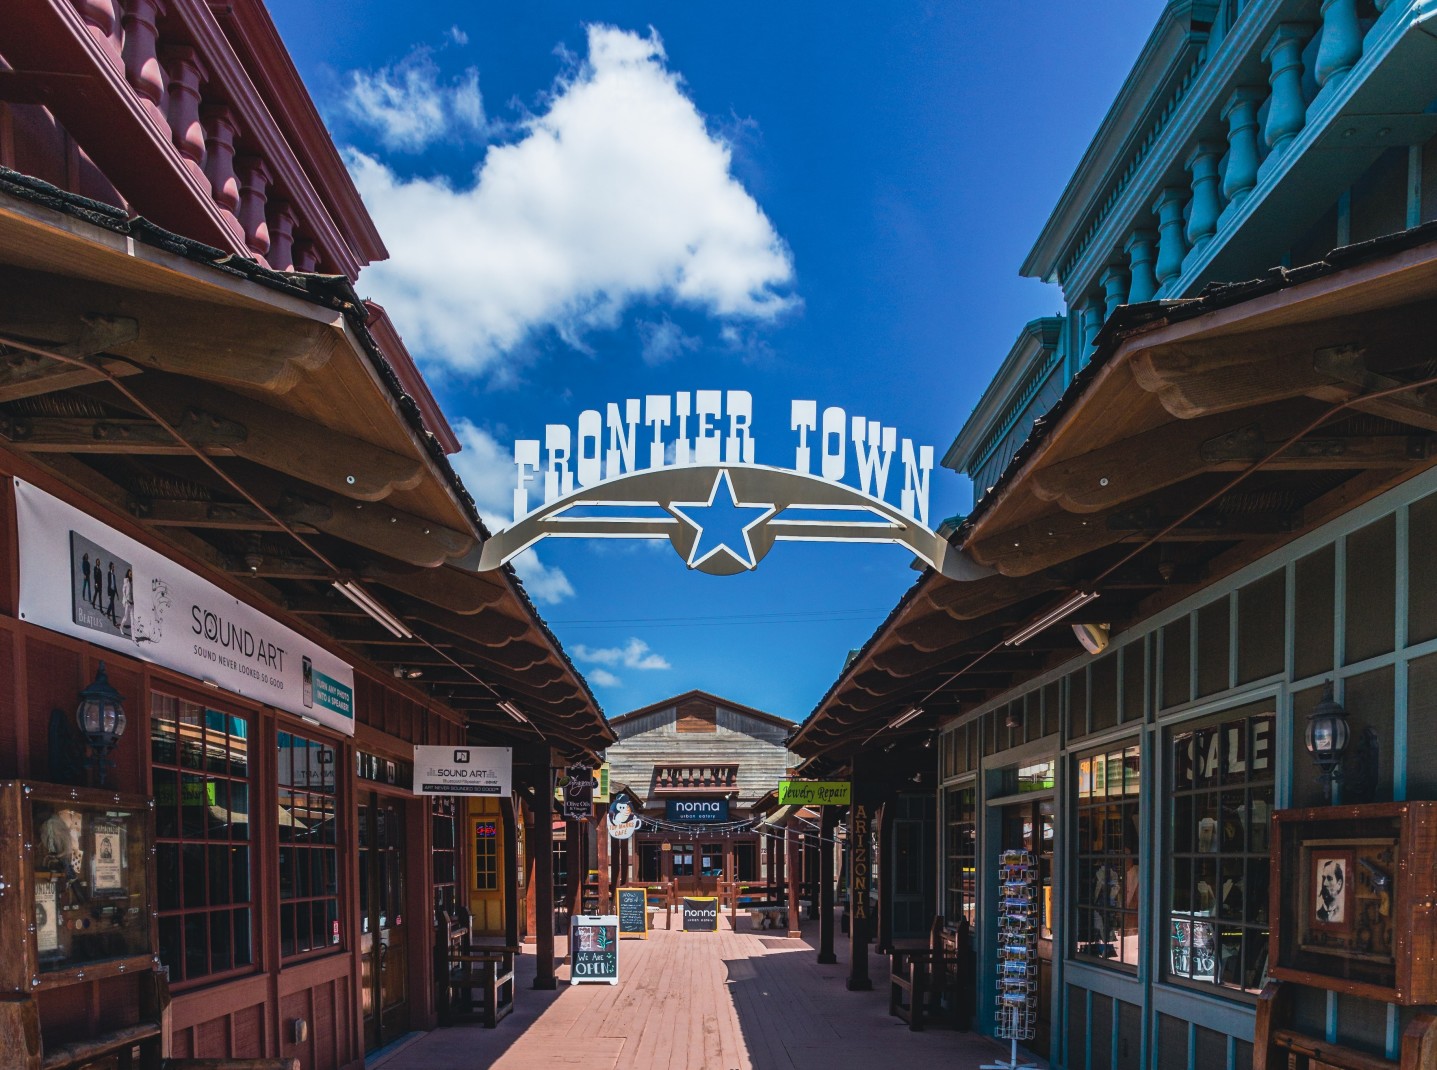 Storefronts with frontier town sign hanging on a sunny day